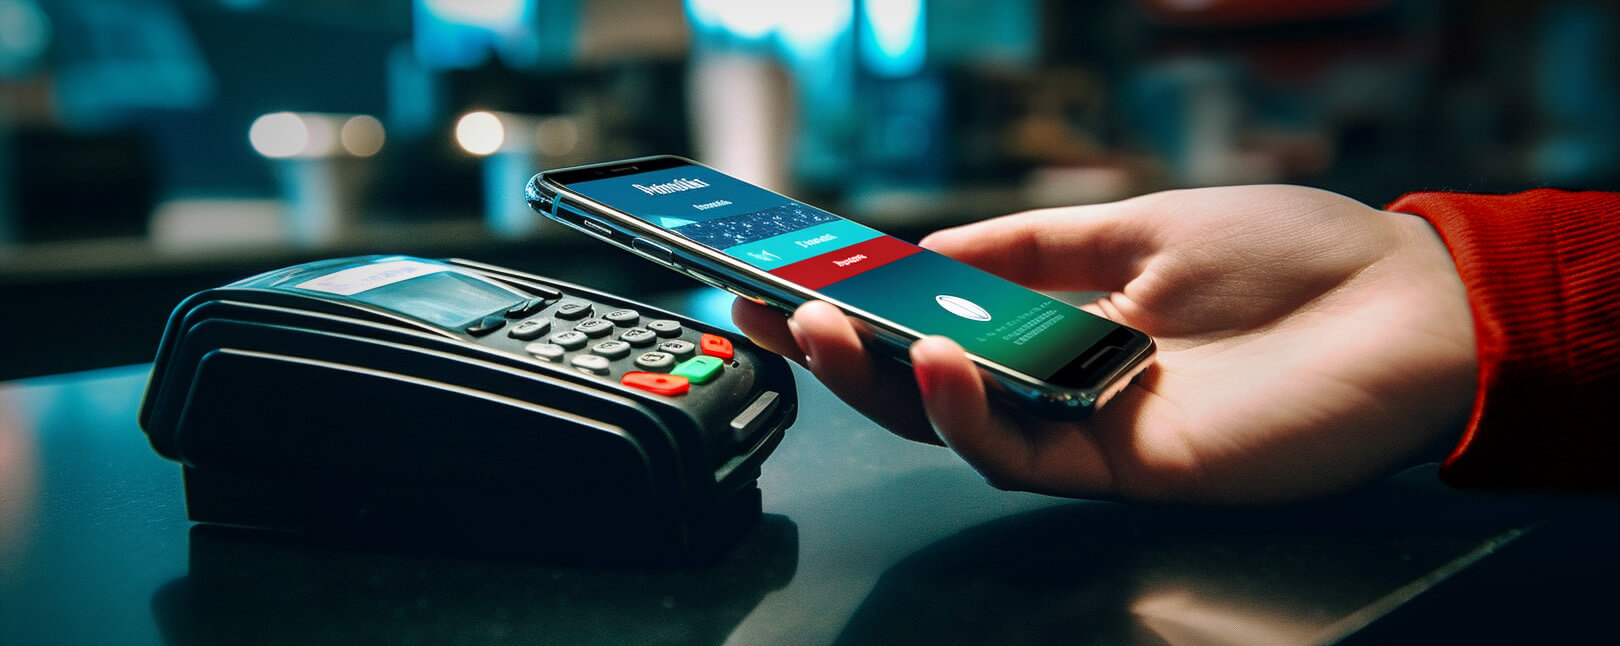 NFC Devices Must Be How Close To One Another For Effective Communication To Occur